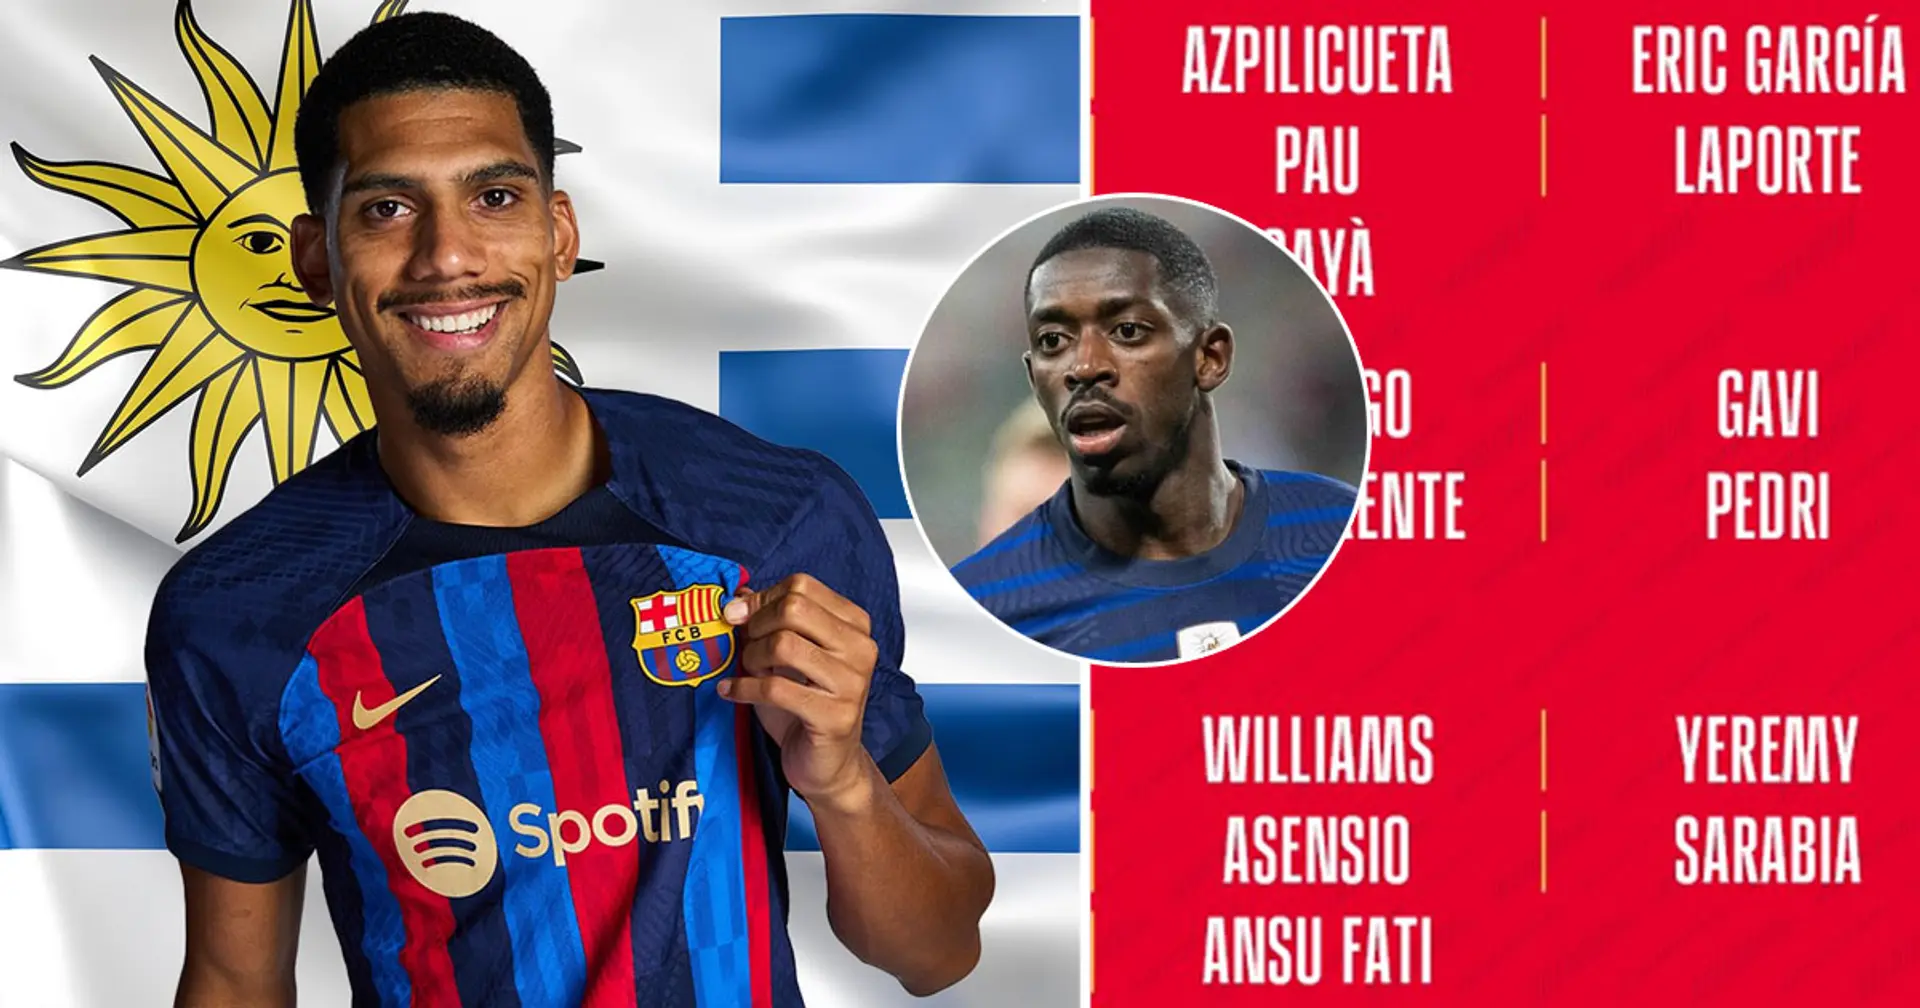 Barca set club record as 16 players called up for World Cup - we name them all